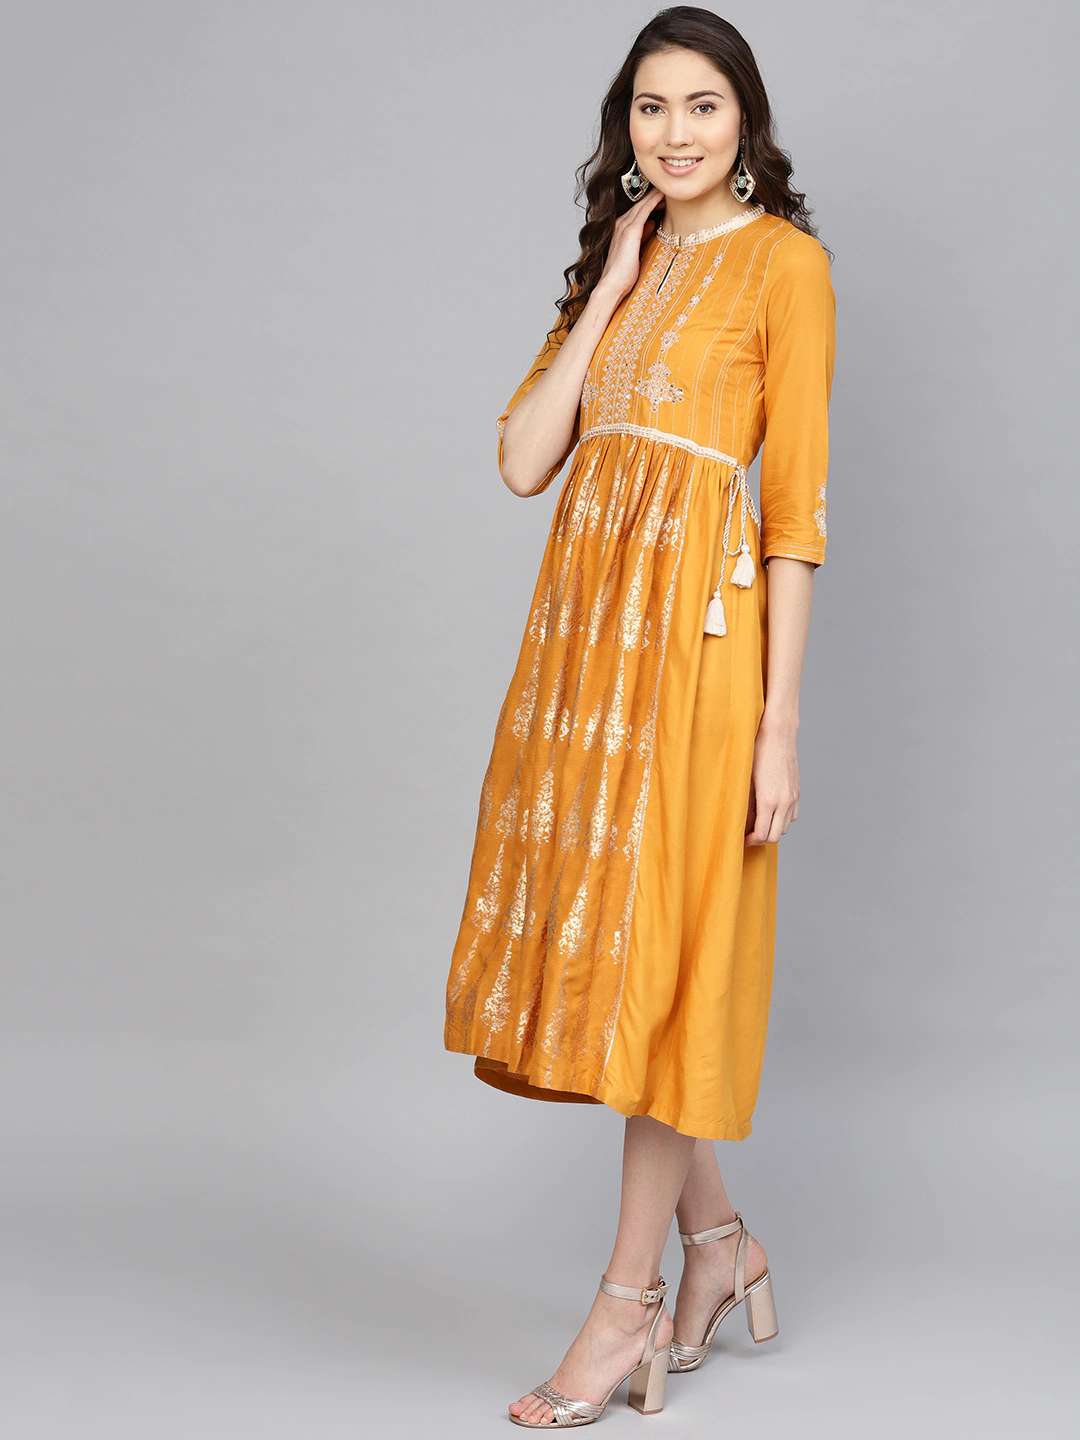 Mustard Yellow & Golden Floral Printed A-Line Dress